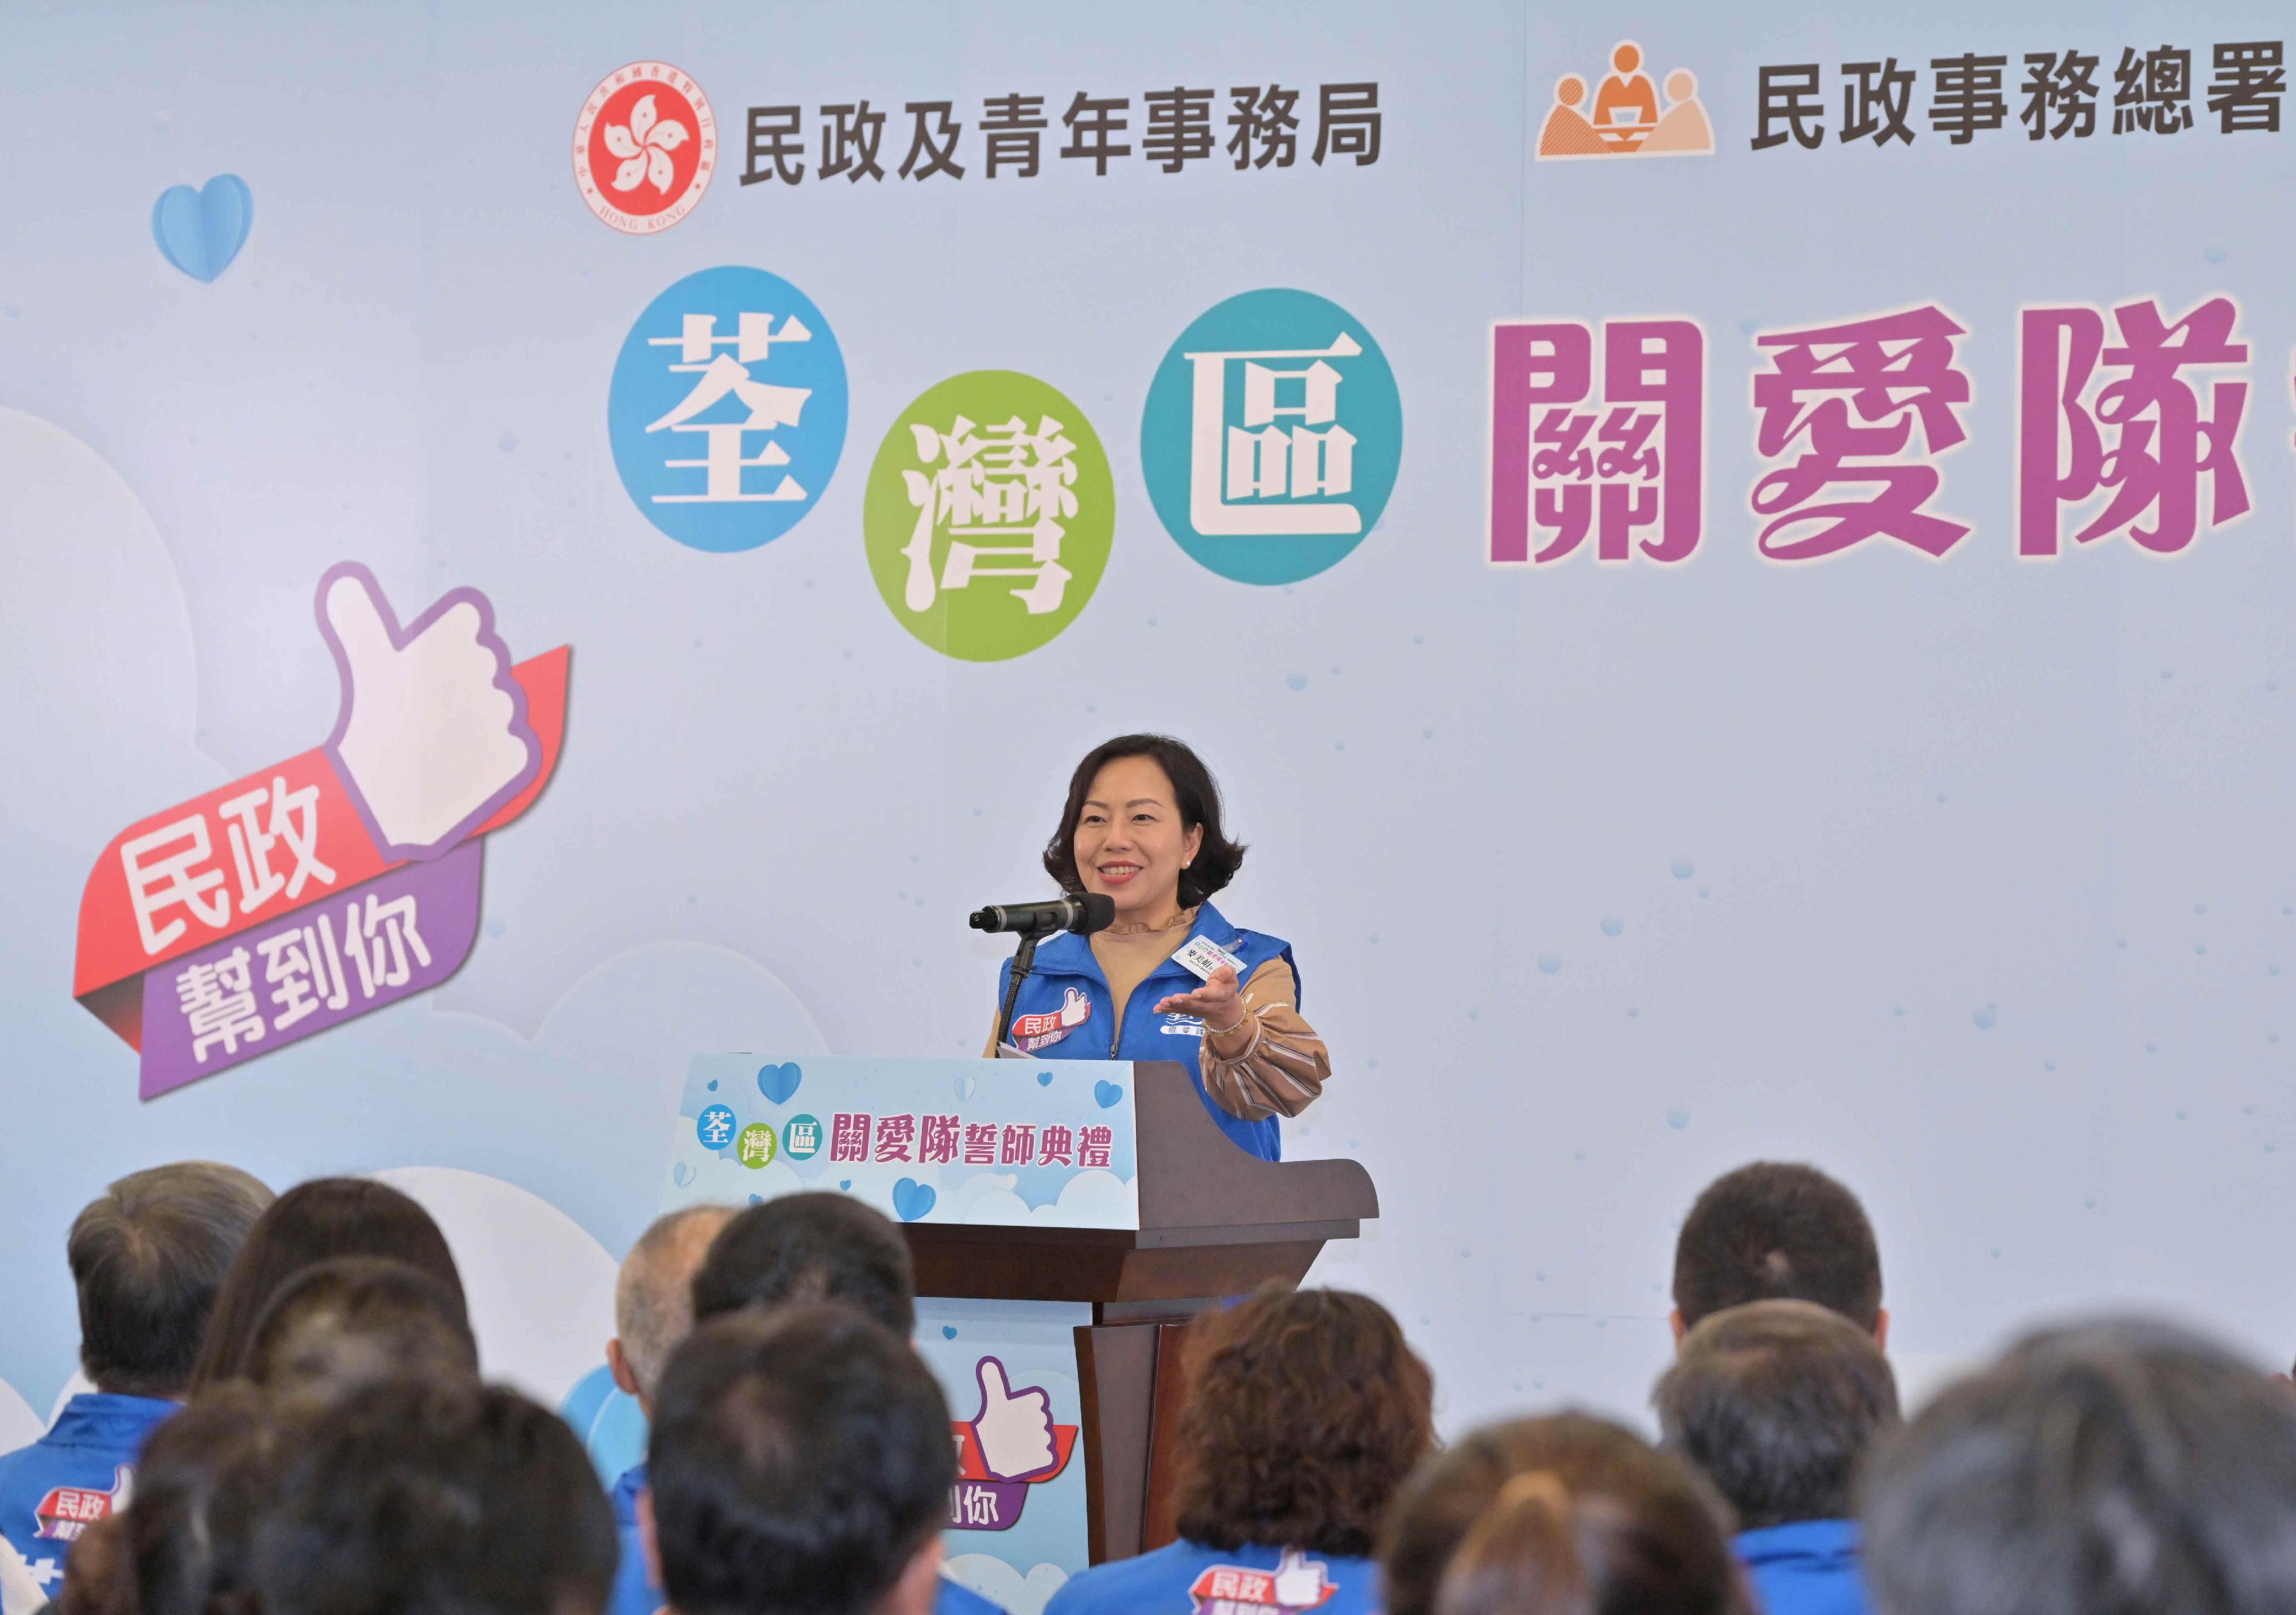 The District Services and Community Care Teams in the Tsuen Wan District were officially launched today (May 5). The Deputy Chief Secretary for Administration, Mr Cheuk Wing-hing, and the Secretary for Home and Youth Affairs, Miss Alice Mak, officiated at the pledging ceremony. Photo shows Miss Mak delivering a speech at the ceremony.